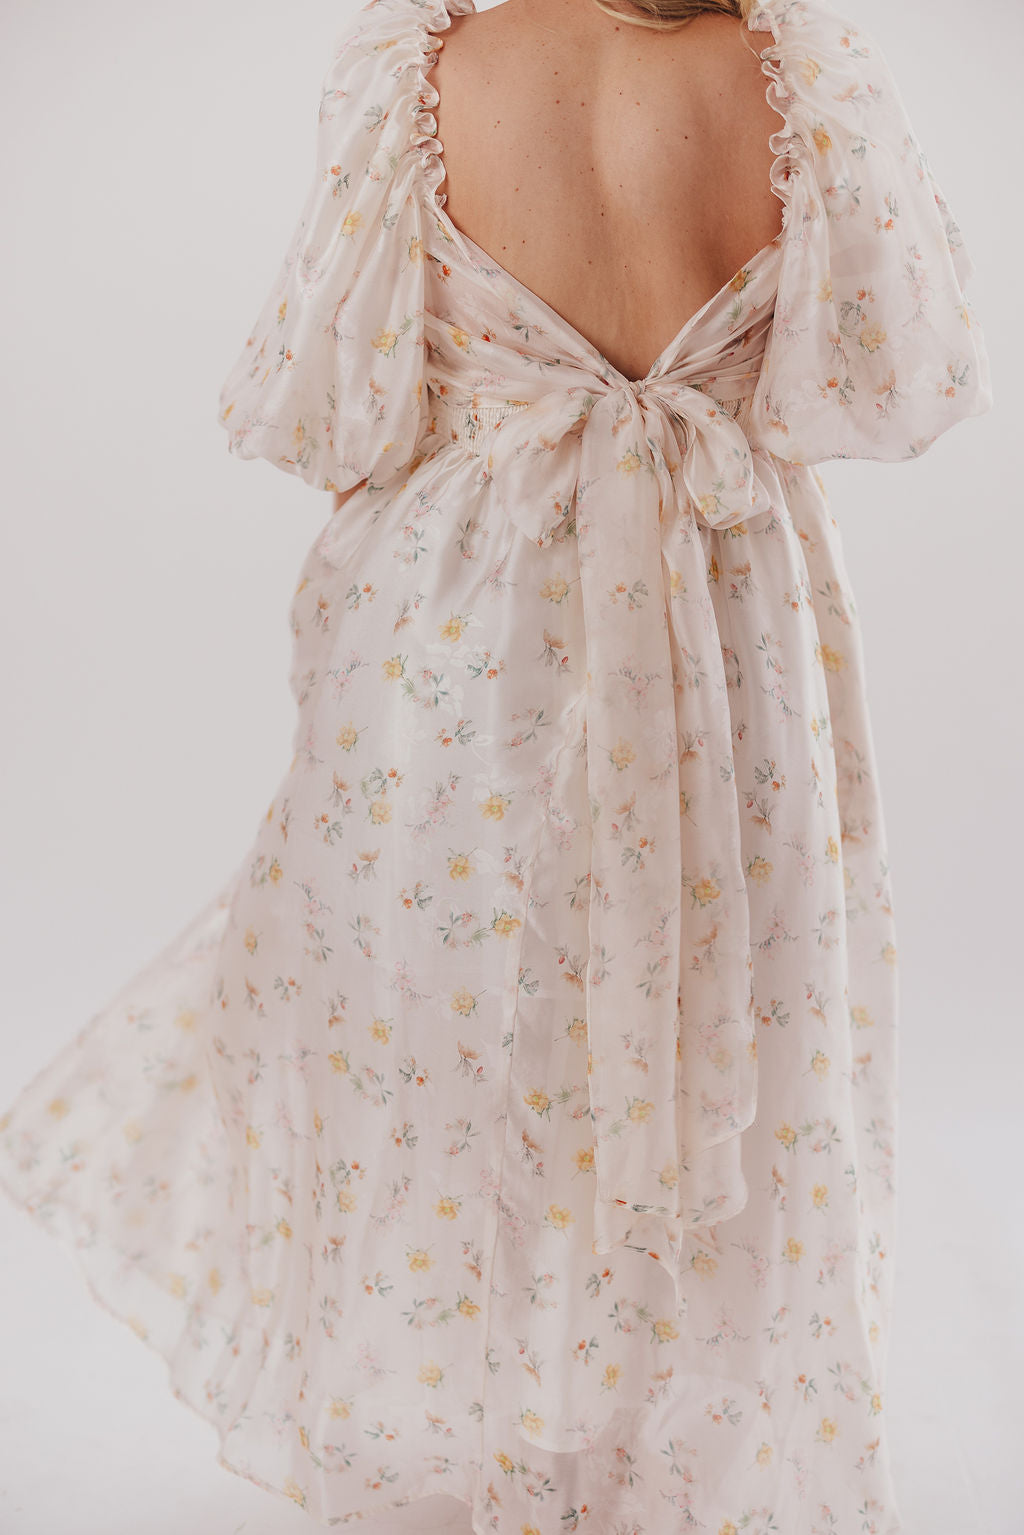 Melody Maxi Dress with Pleats and Bow Detail in Yellow Rose Floral - Bump Friendly & Inclusive Sizing (S-3XL) ($40 OFF THIS WEEK)